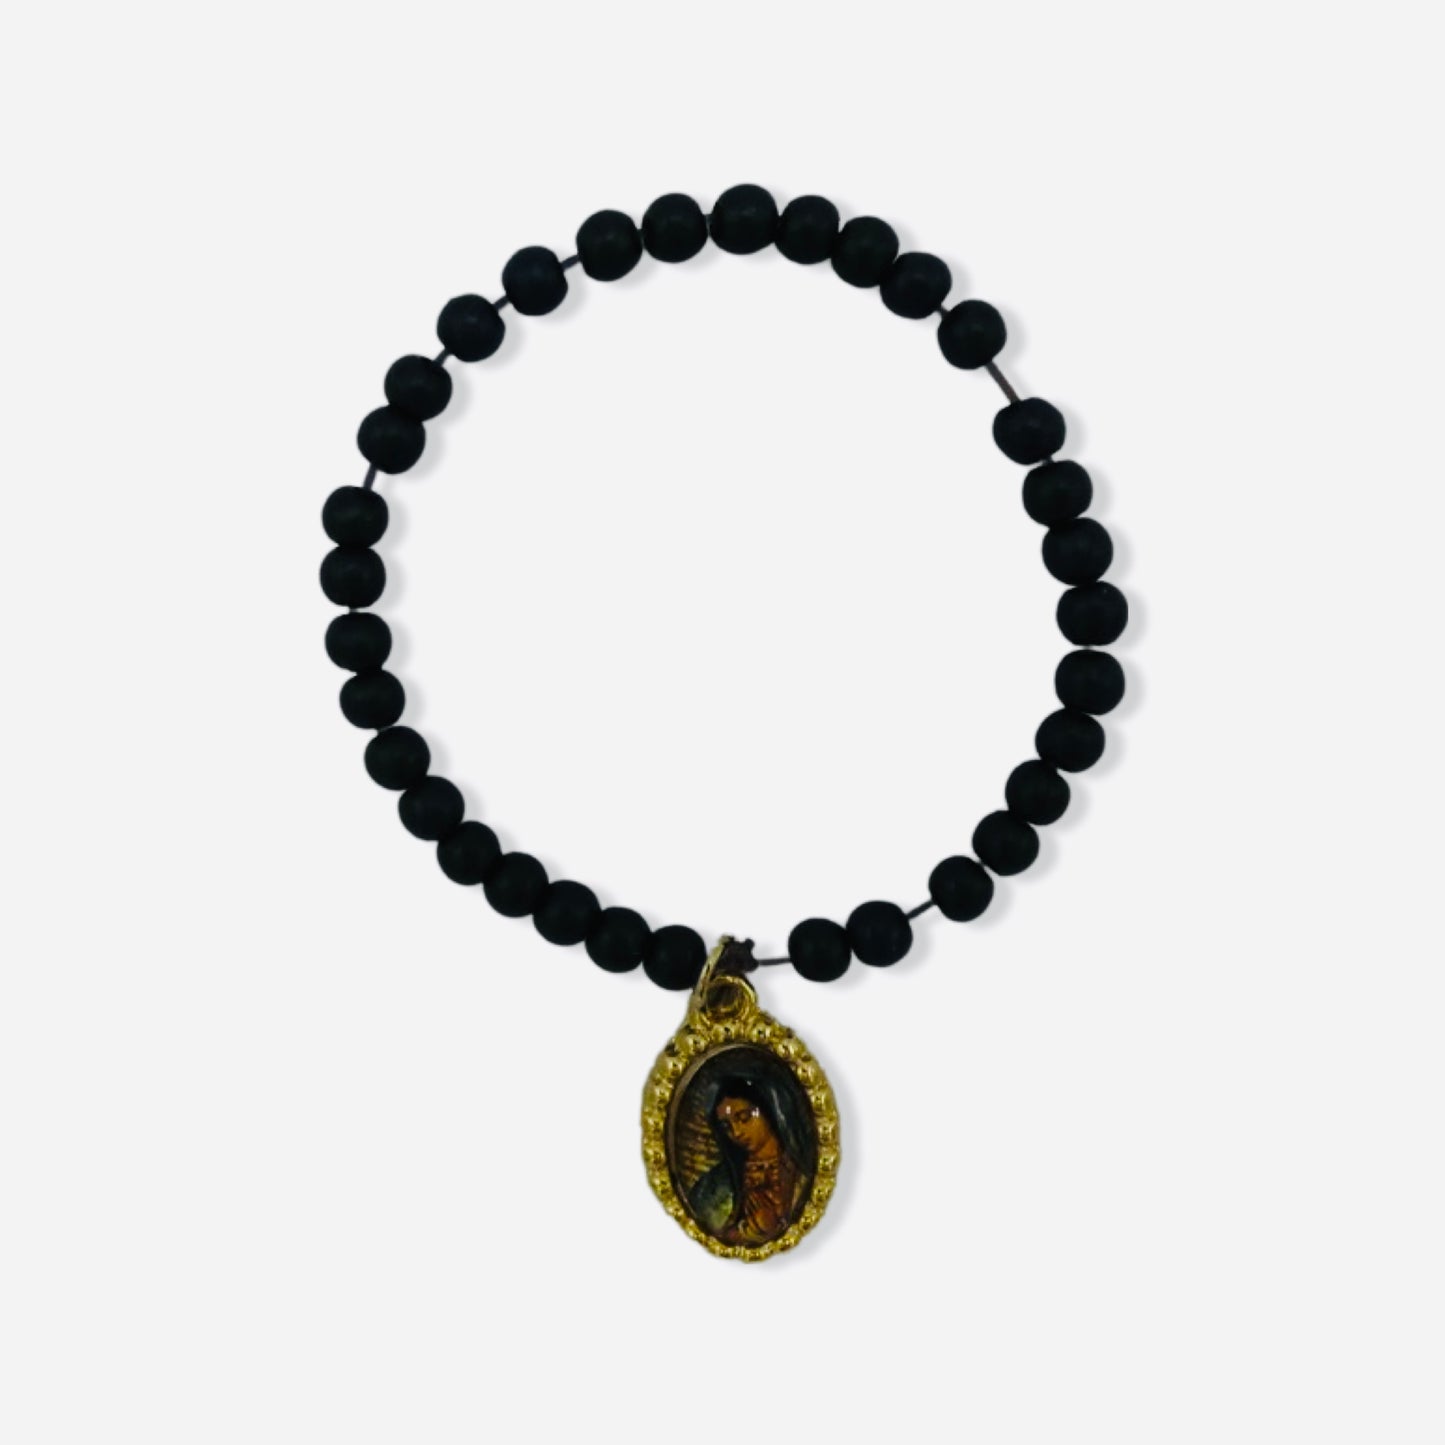 Children's Guadalupe Bracelet of Assorted Colors